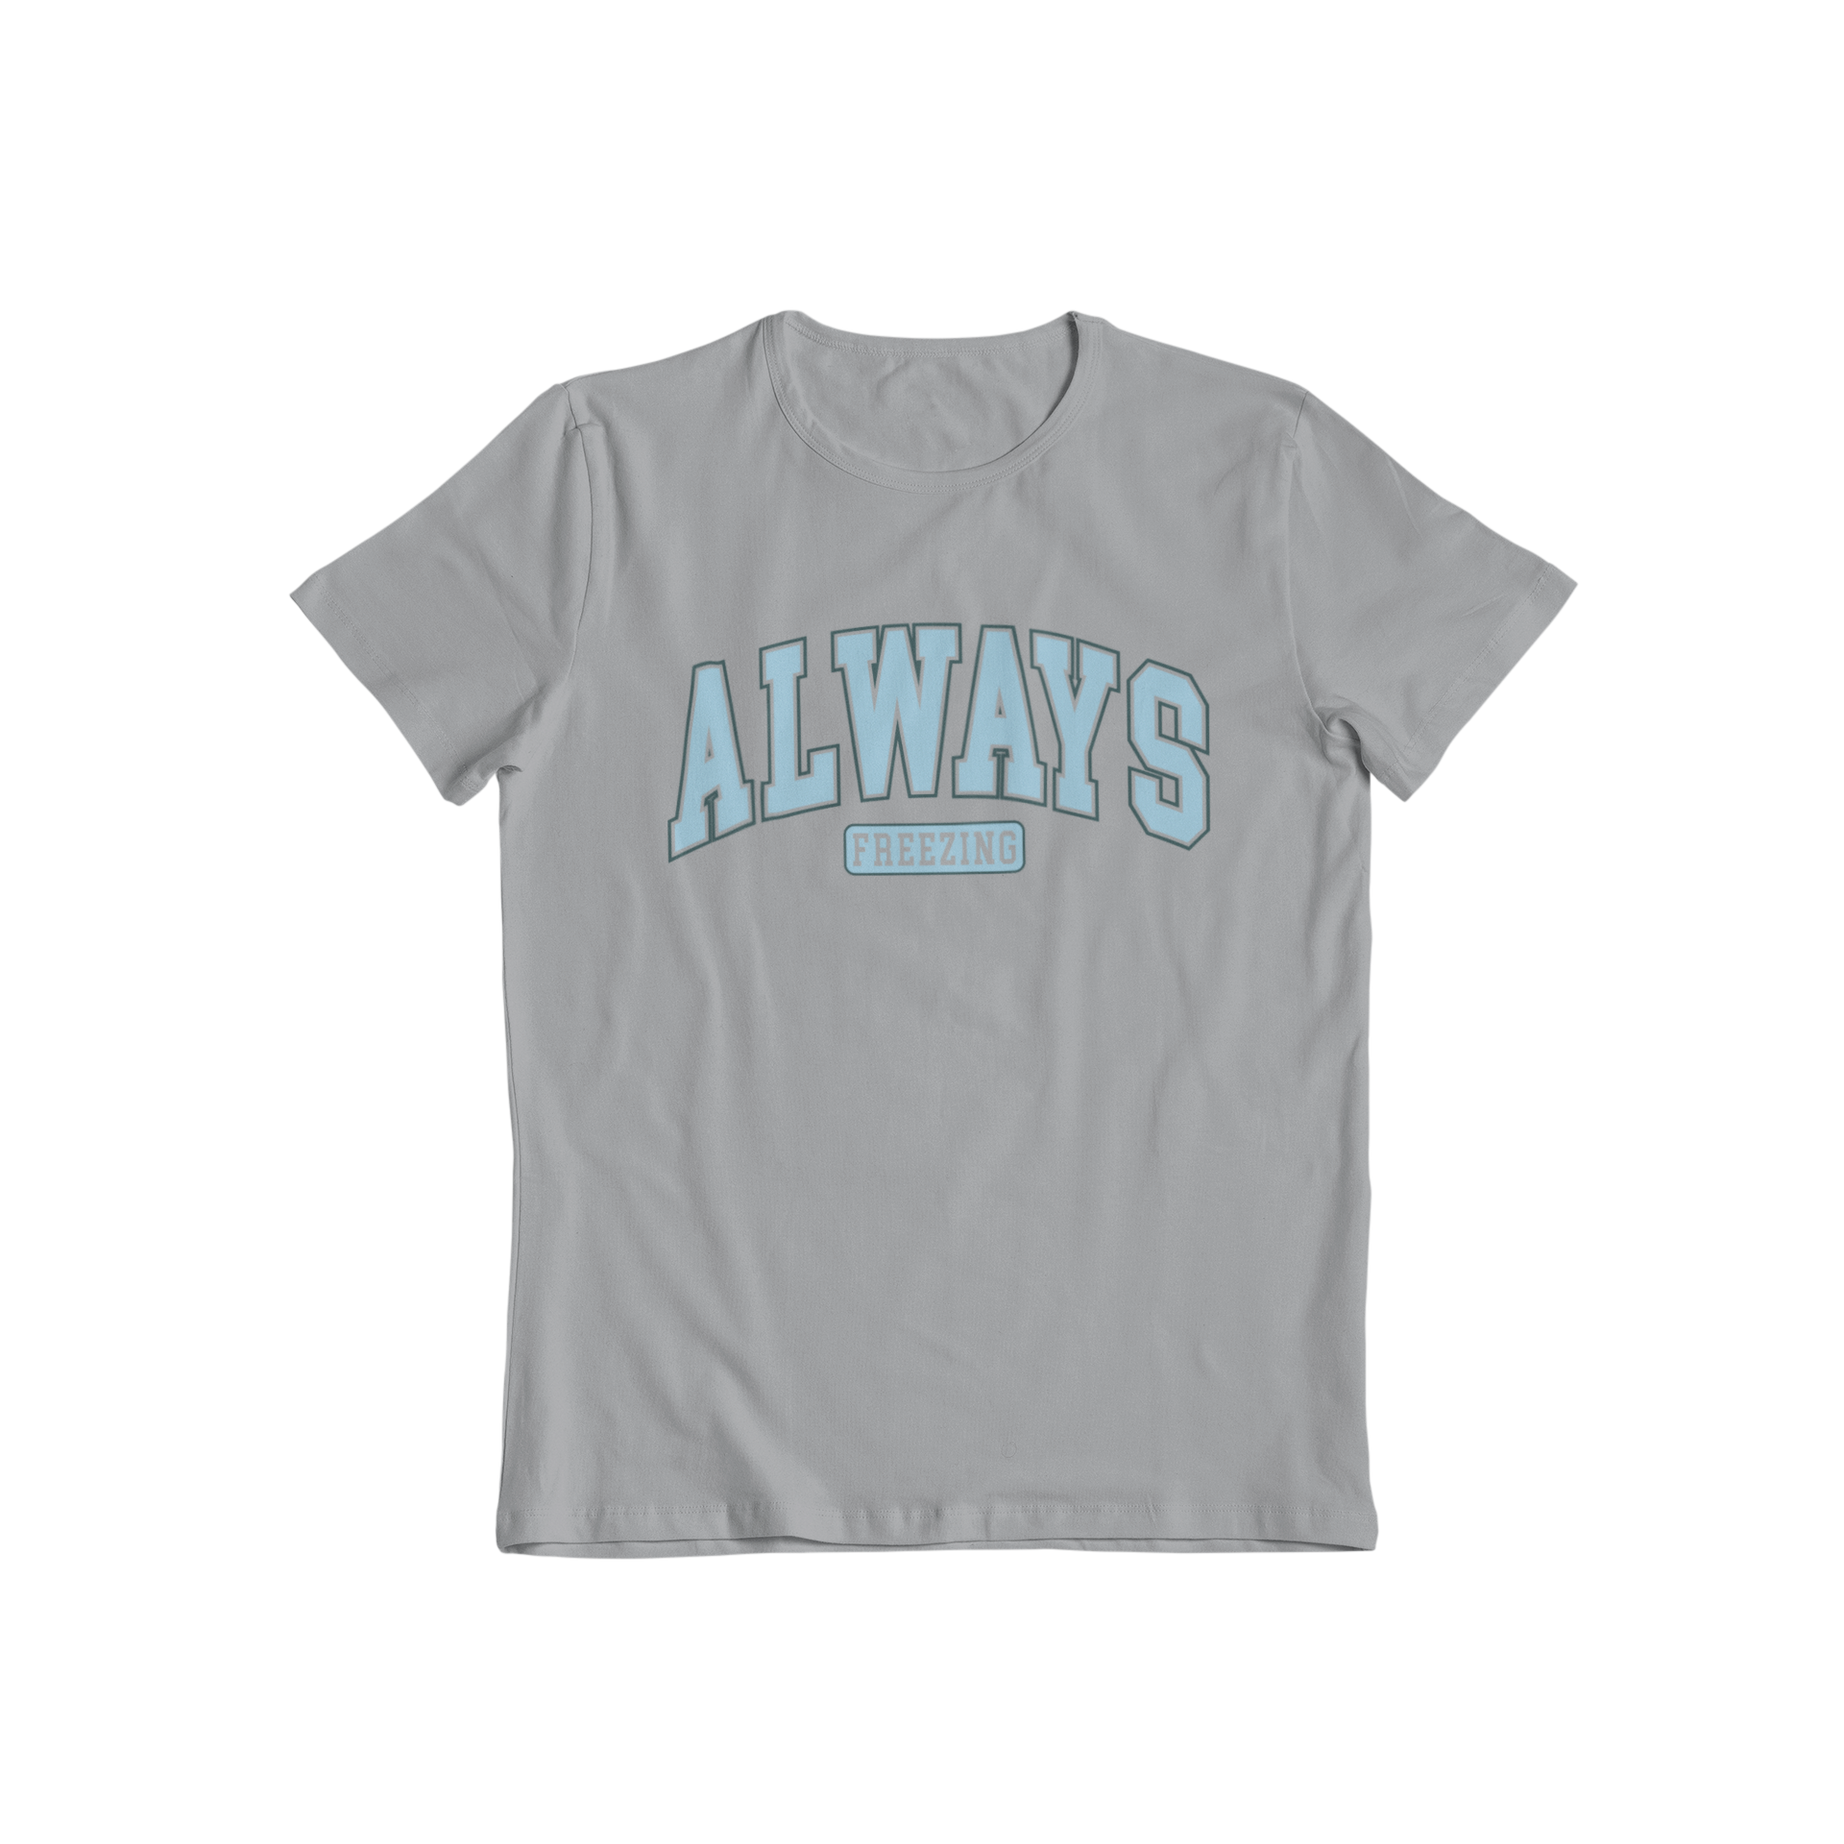 Stay comfortable in the Always Freezing T-shirt! Its lightweight and breathable fabric helps regulate your body temperature, making it perfect for hot or cold days. The blue print slogan ensures a standout style. Get yours today!